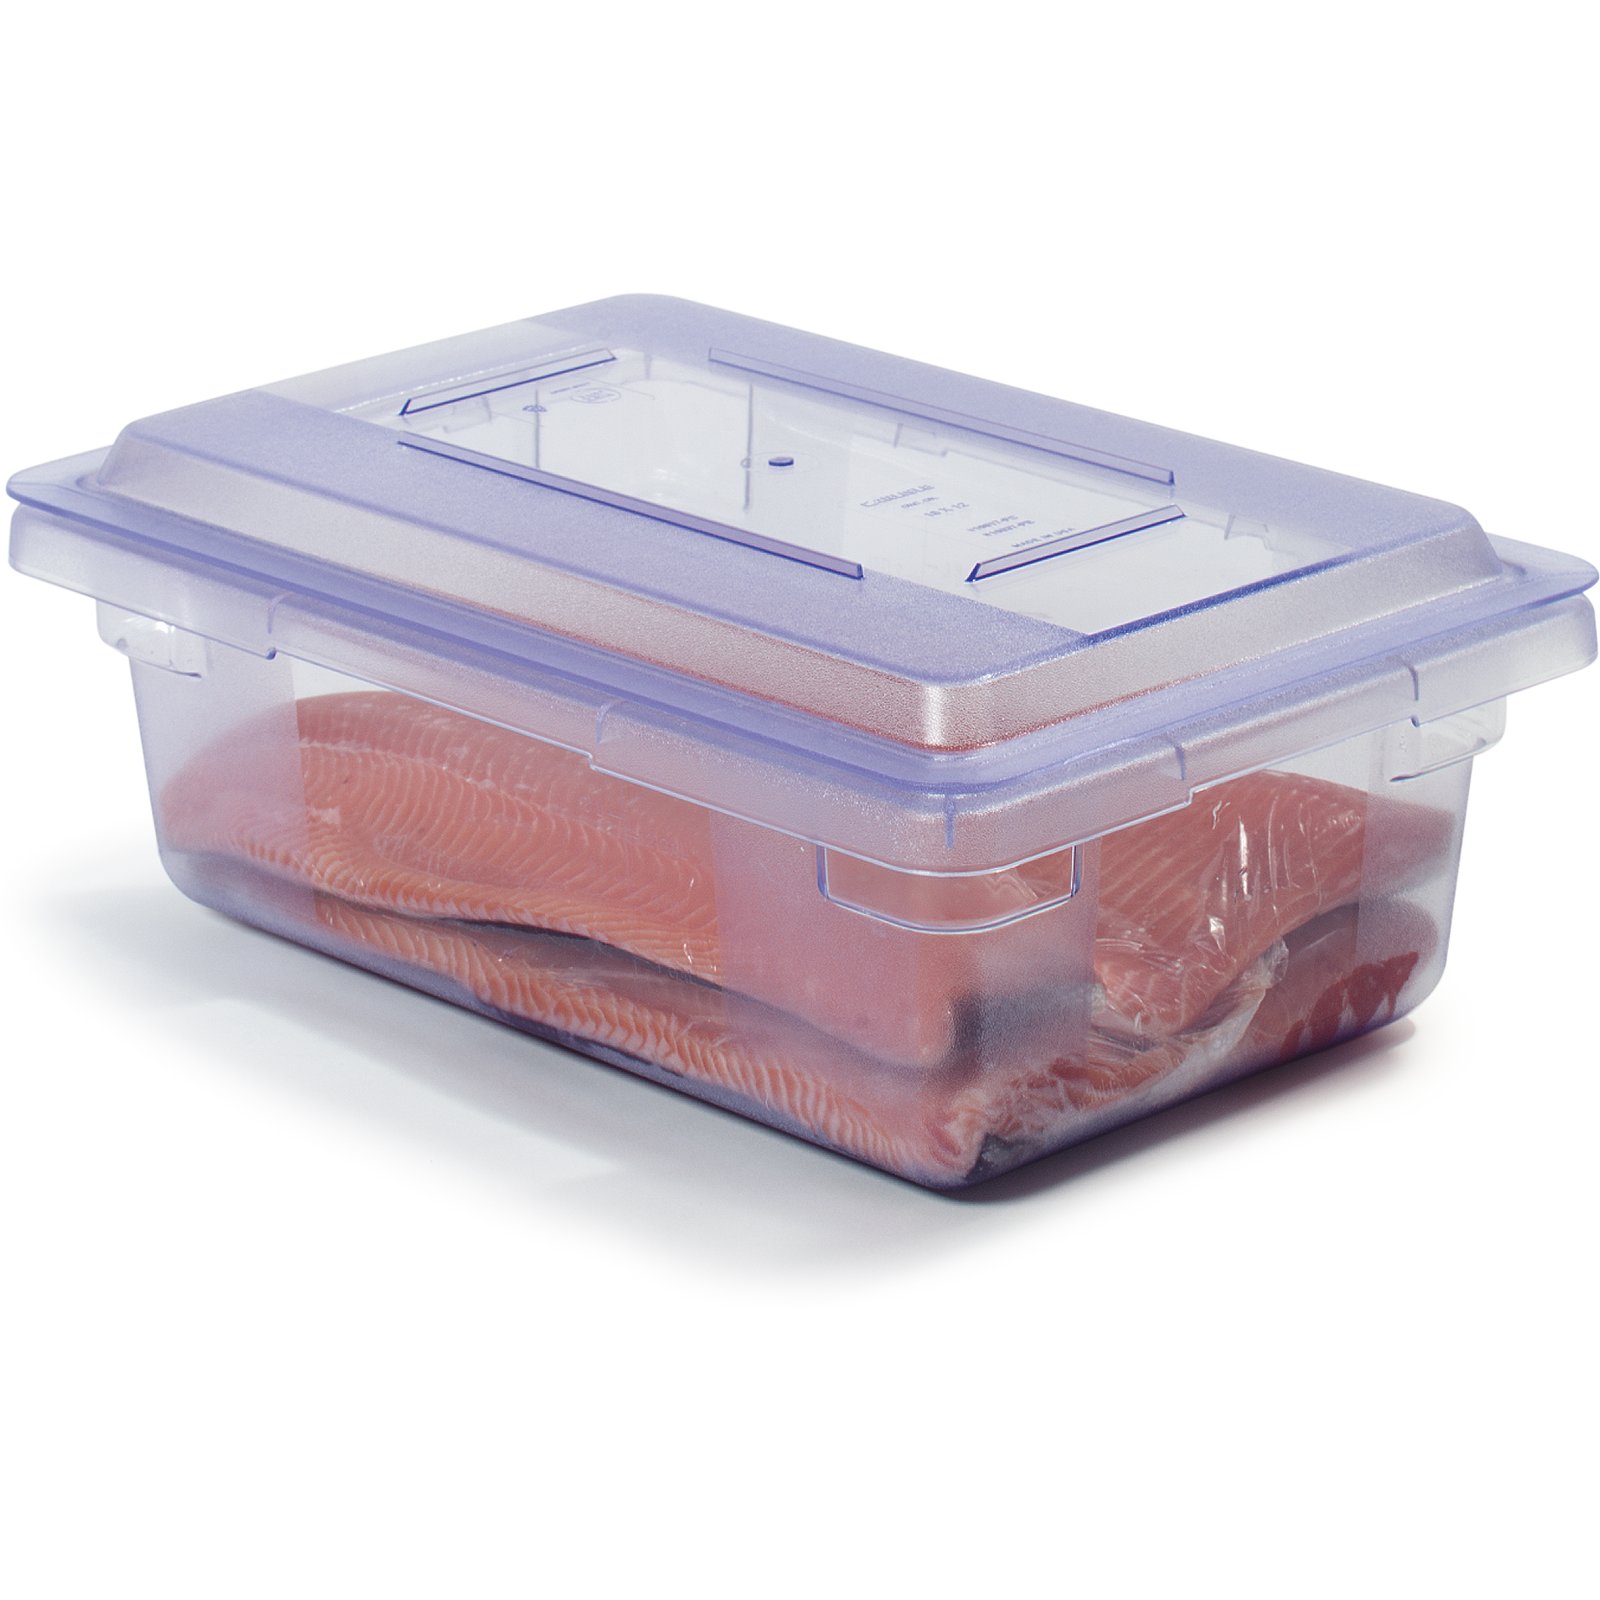 Carlisle Food Service Products 21.5 Gal Rectangle Plastic Food Storage Container (Set of 3) Carlisle Food Service Products